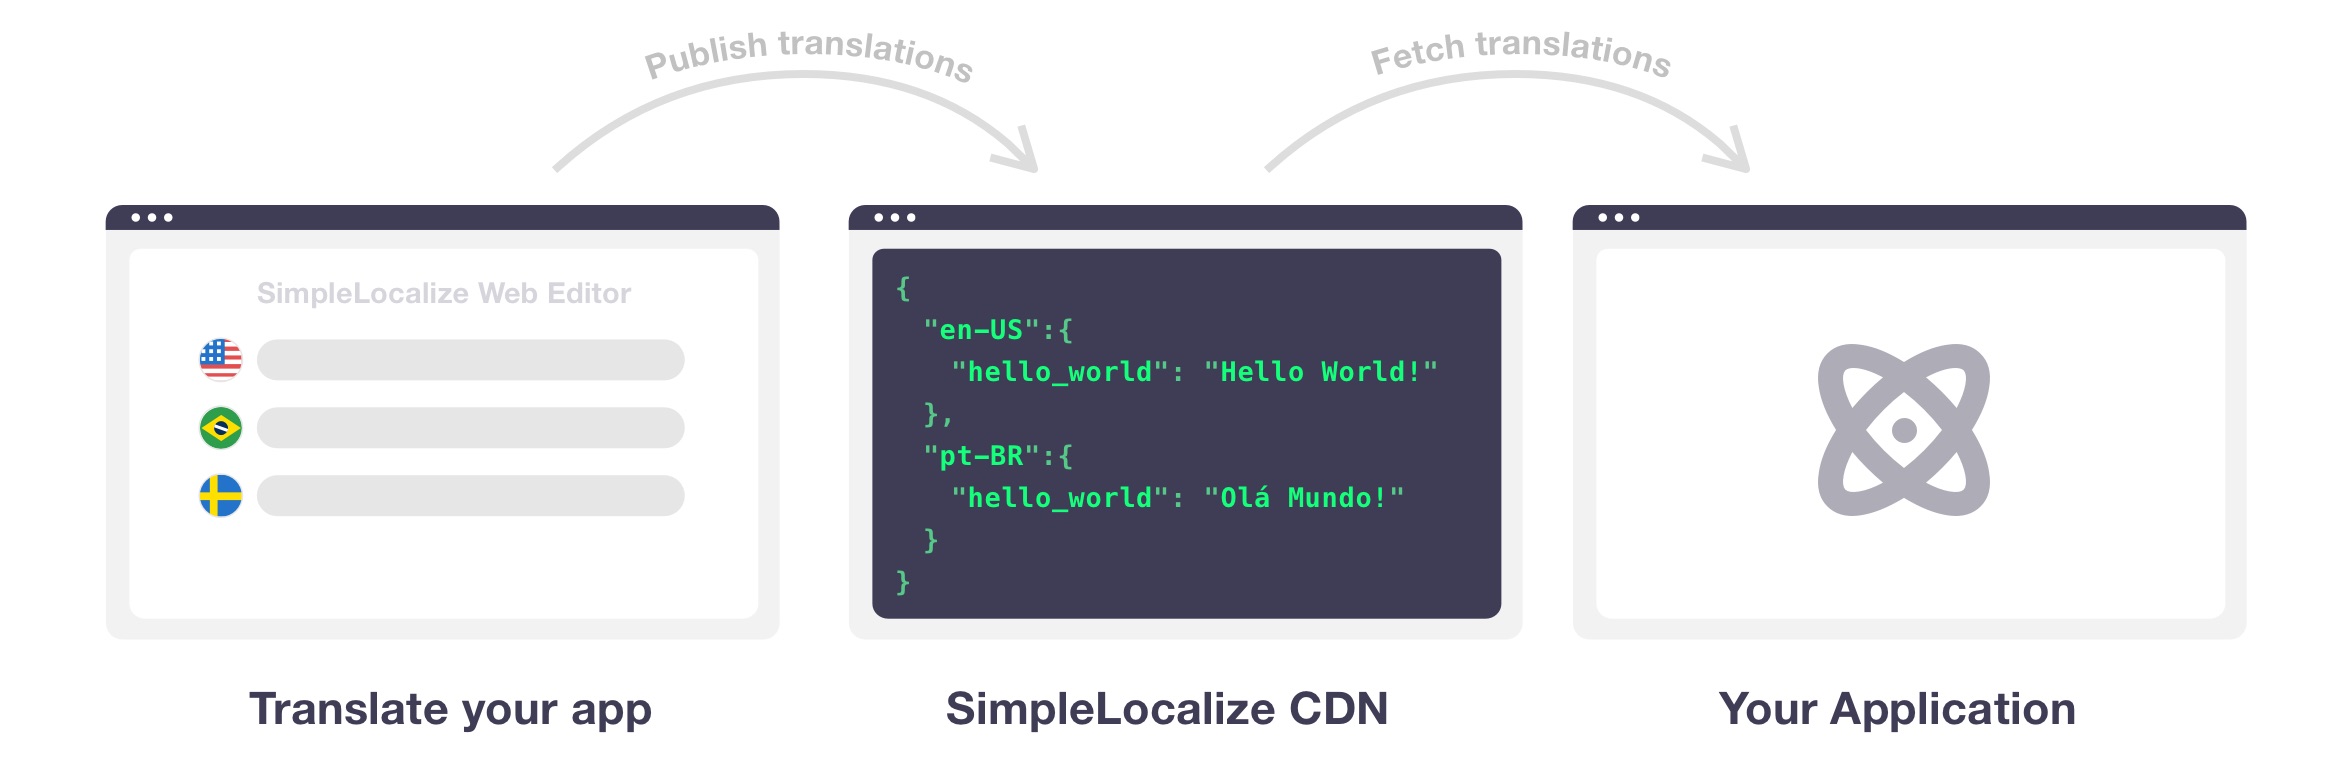 FormatJS: changing translations in realtime